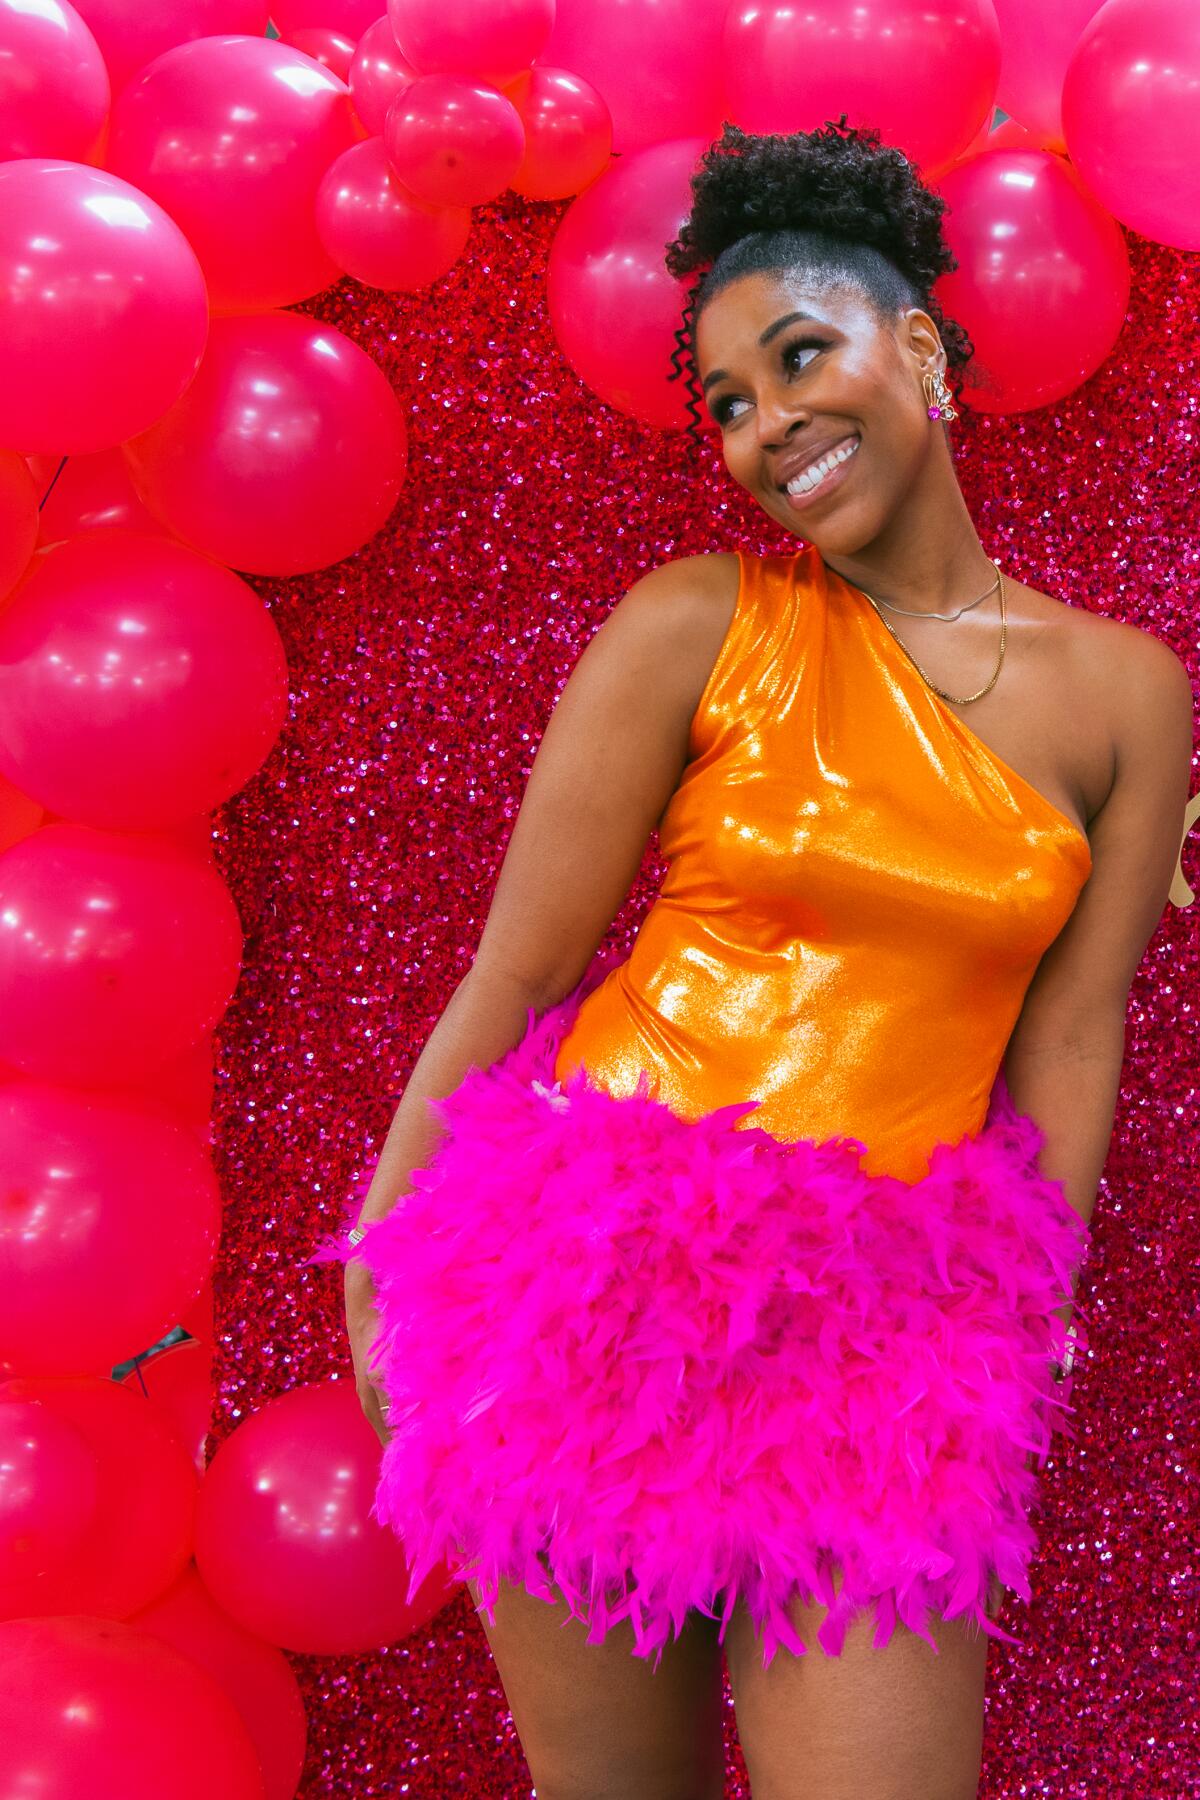 A portrait of Aryn Morris, wearing an orange top and feathered pink skirt, against a pink background